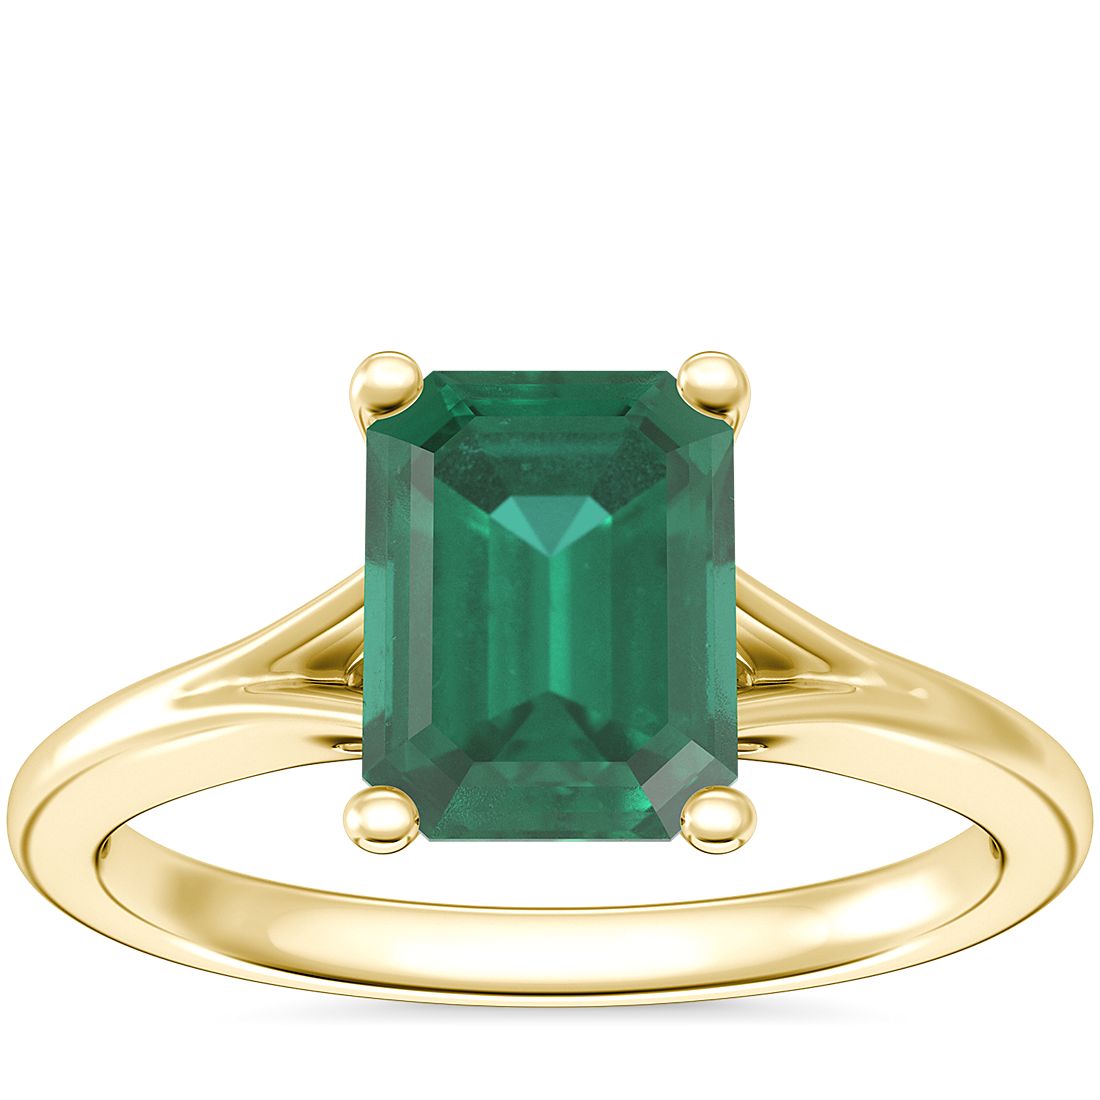 Petite Split Shank Solitaire Engagement Ring with Emerald-Cut Emerald in 18k Yellow Gold (8x6mm)